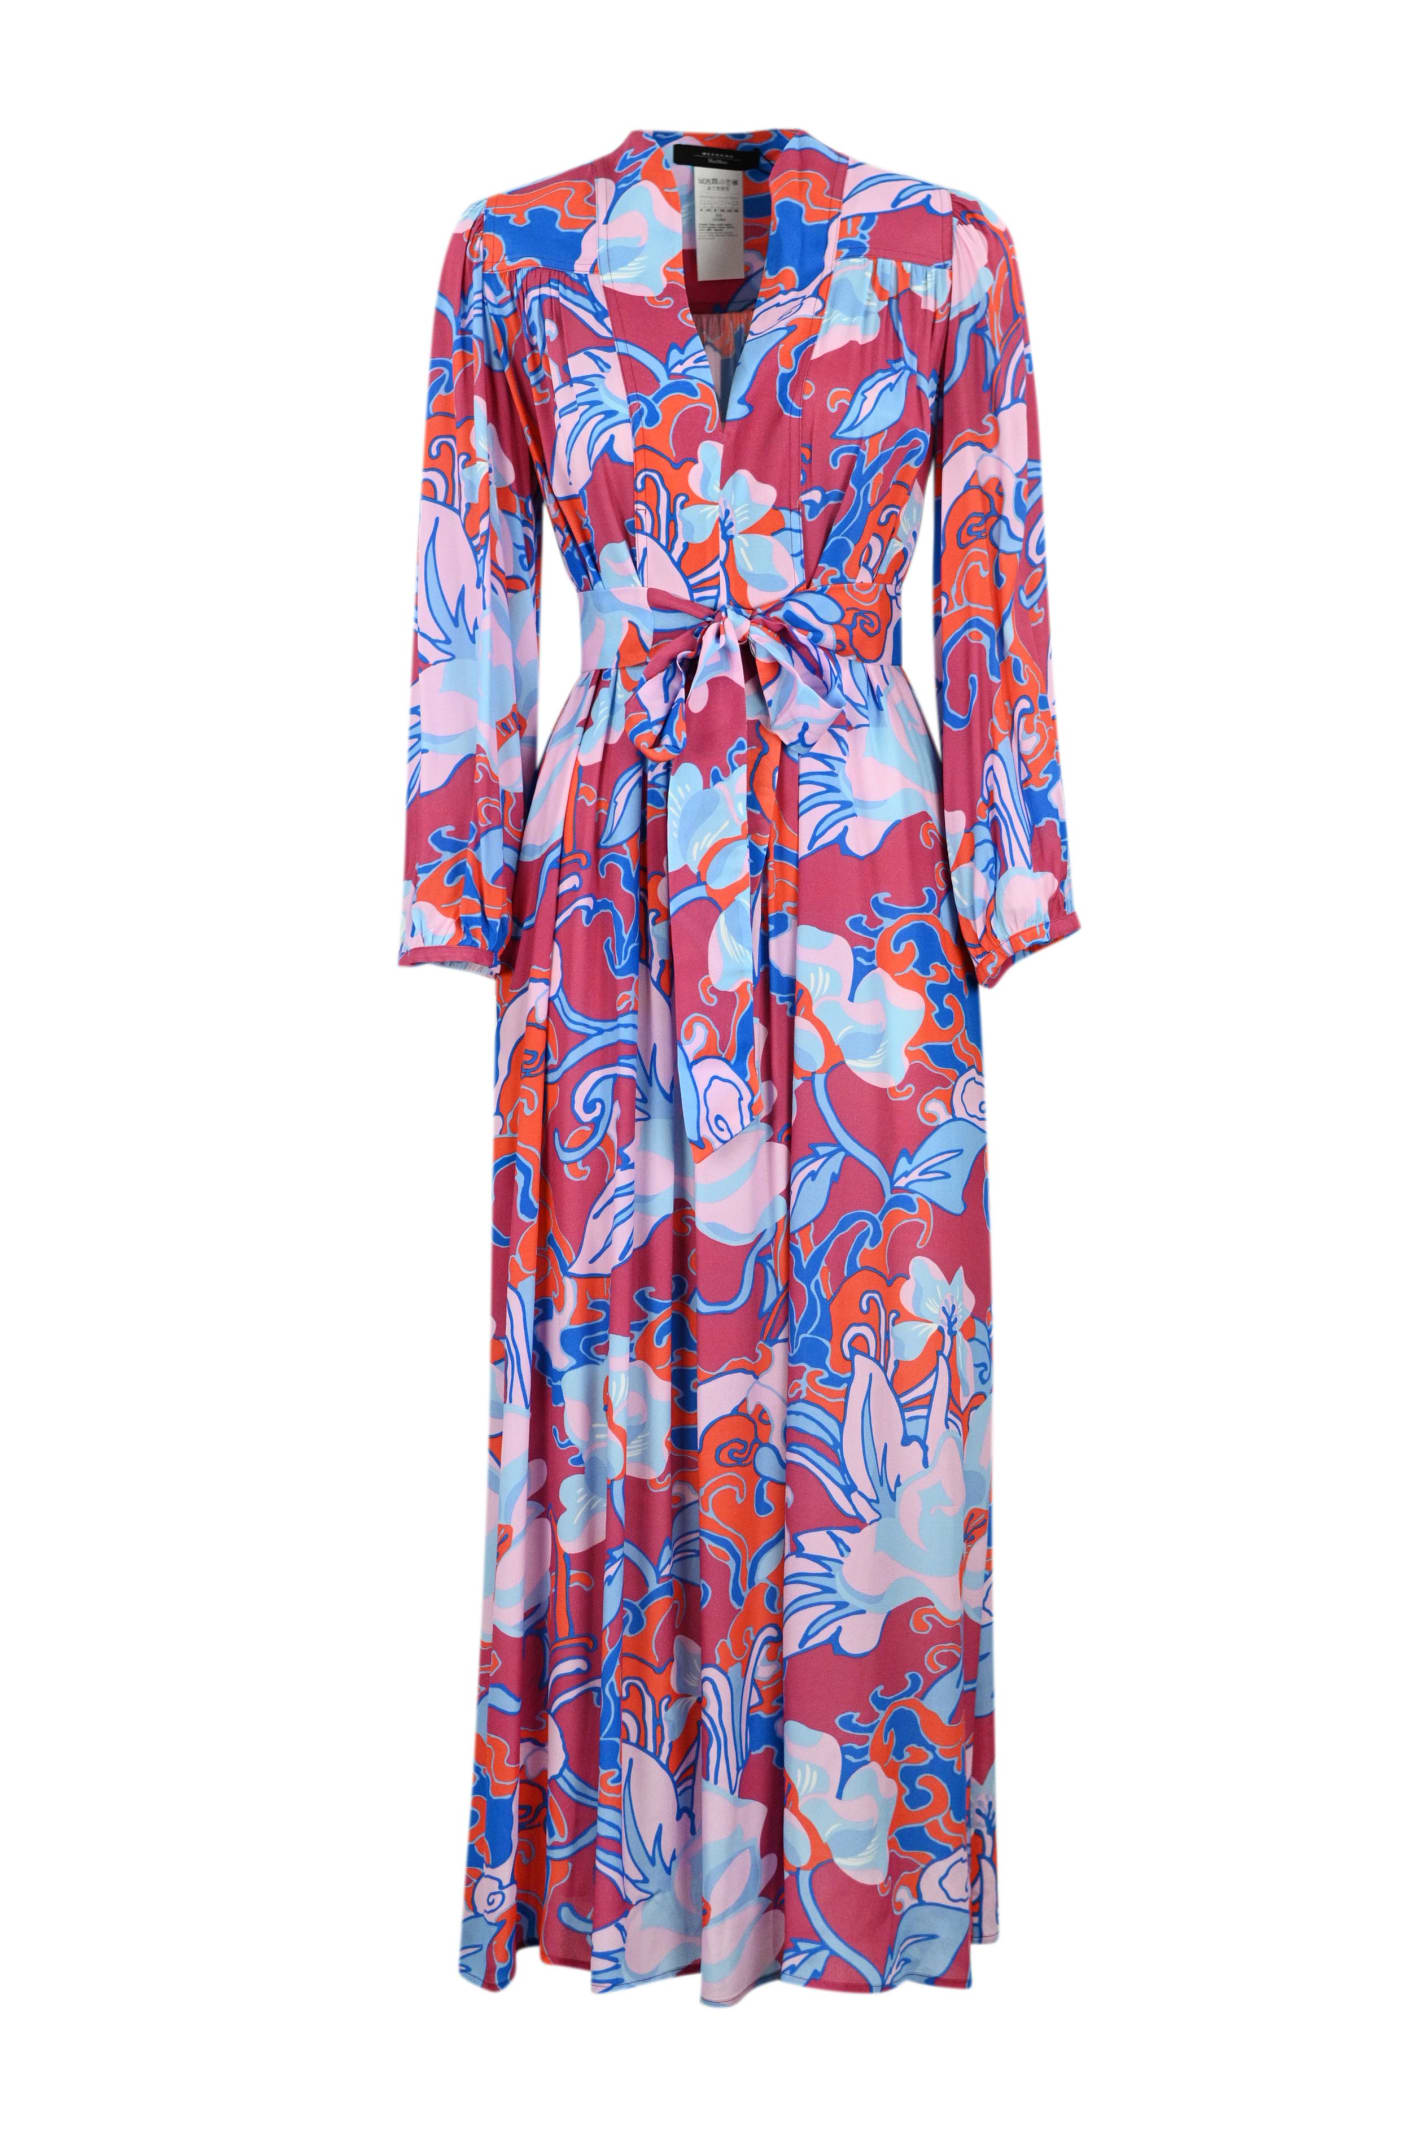 WEEKEND MAX MARA OBLIO DRESS WITH FLORAL PATTERN